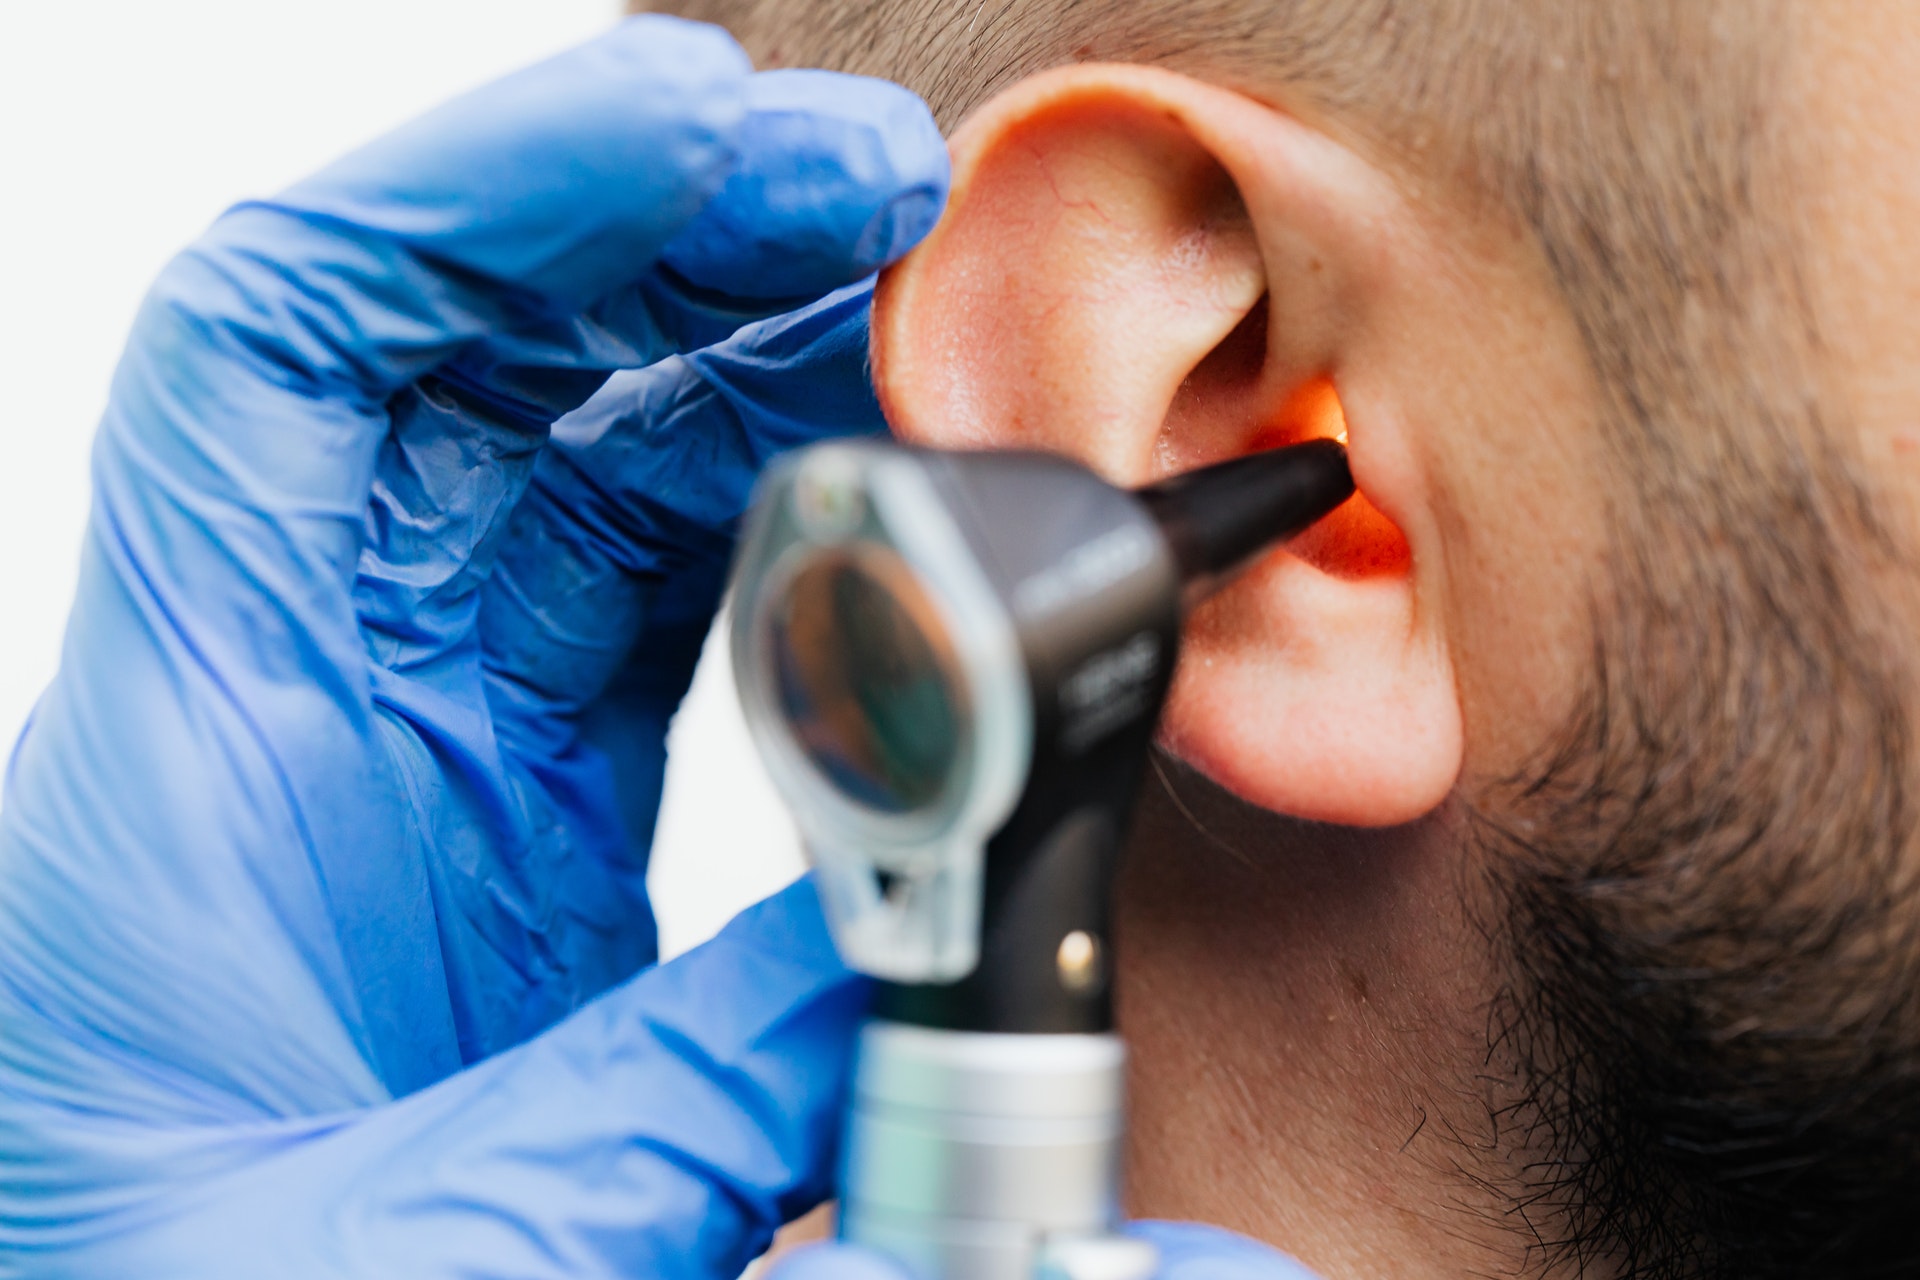 An ear inspection using an otoscope during a hearing appointment